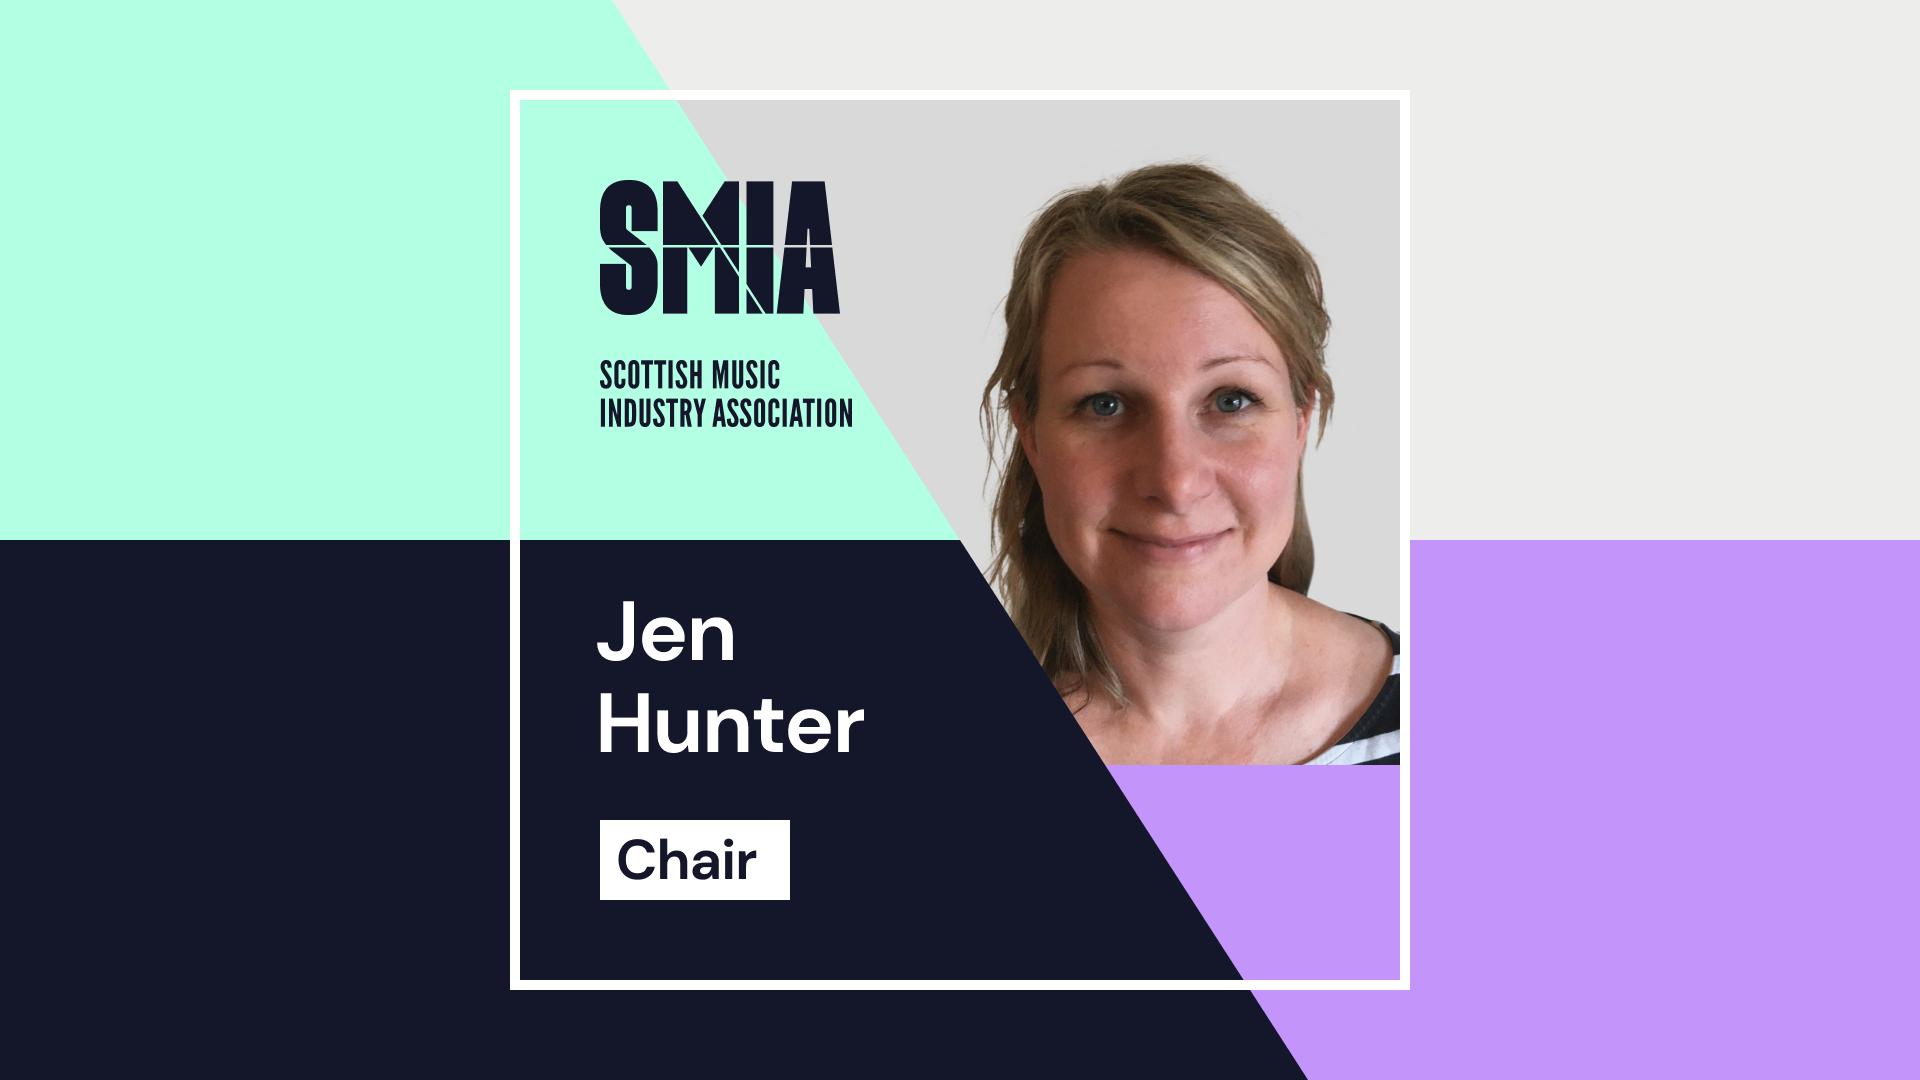 NEWS: WE’RE PLEASED TO ANNOUNCE JEN HUNTER AS SMIA CHAIR + MORE